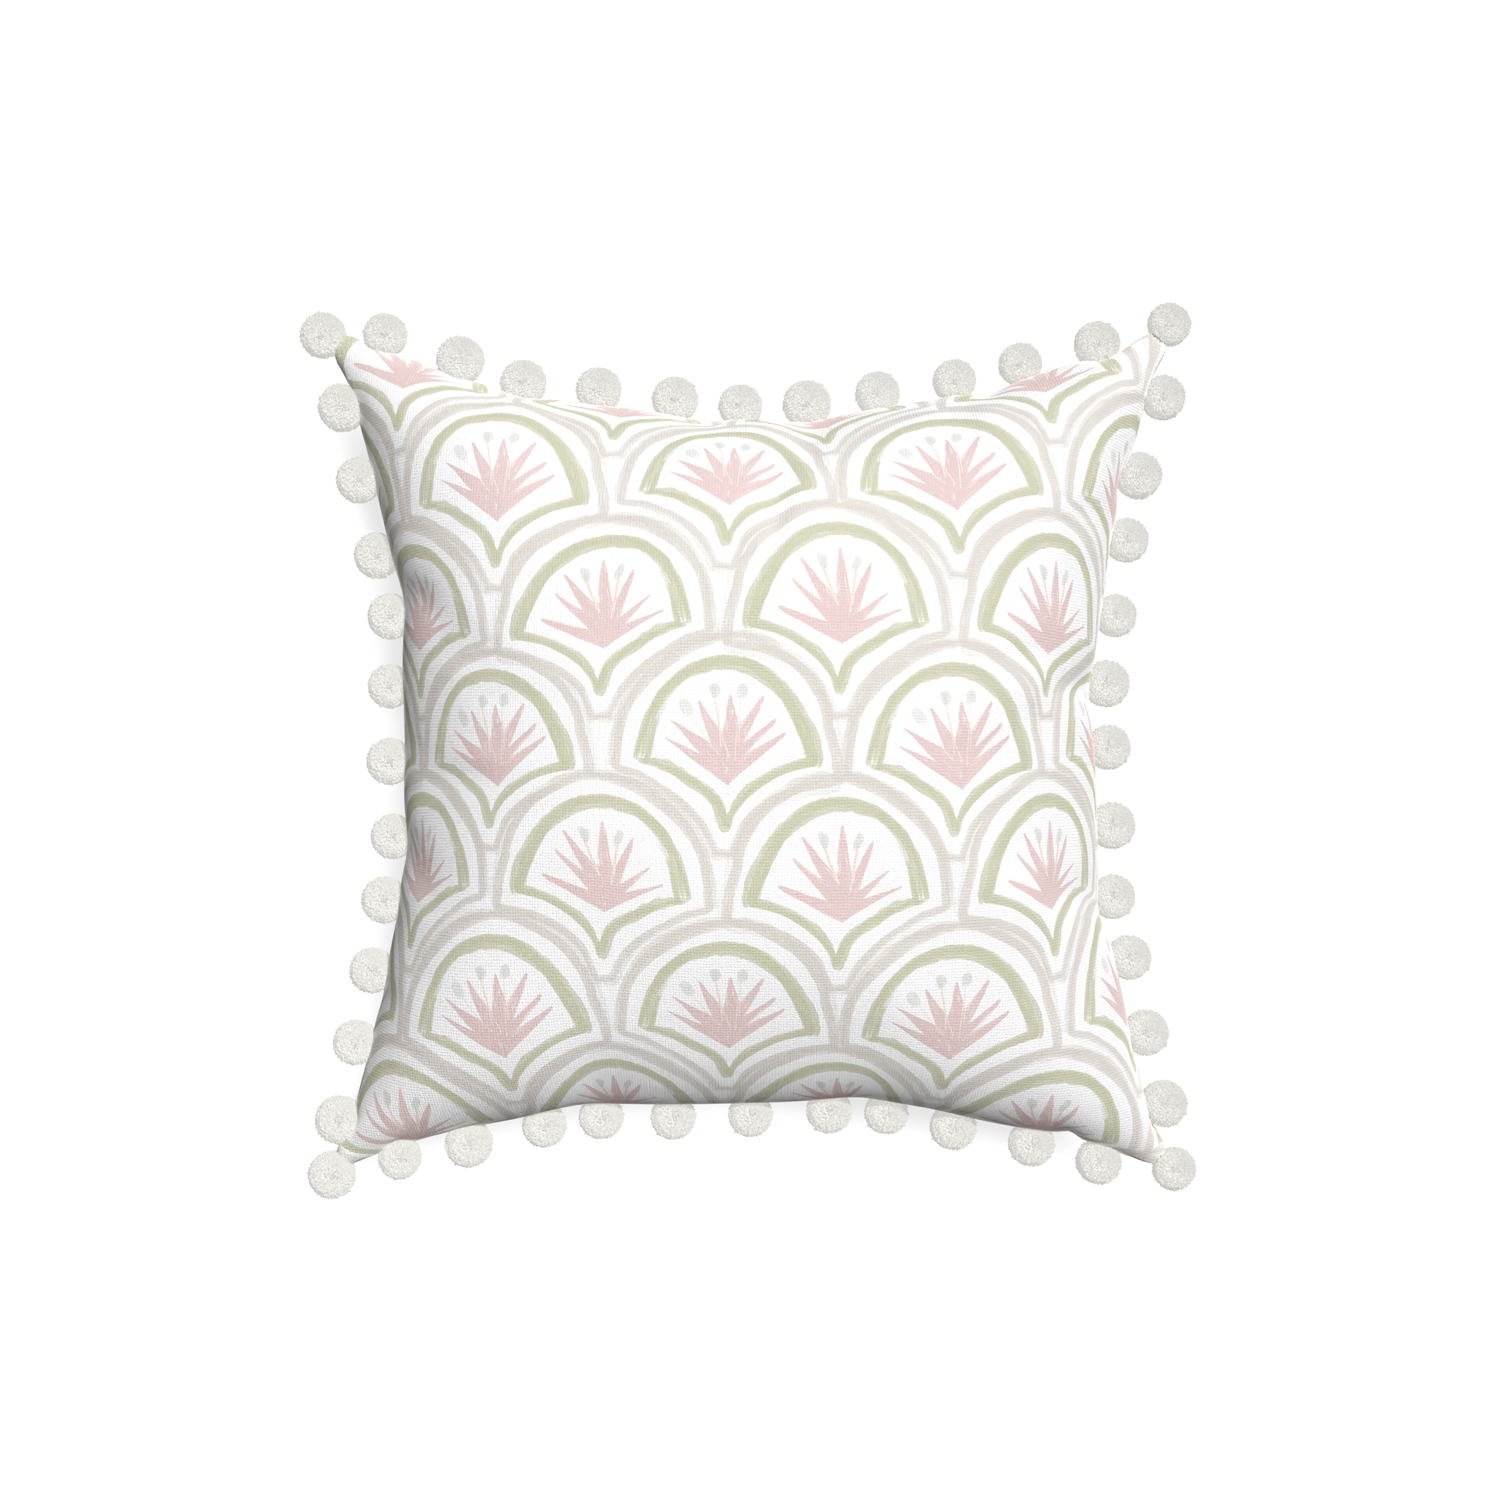 18-square thatcher rose custom pink & green palmpillow with snow pom pom on white background